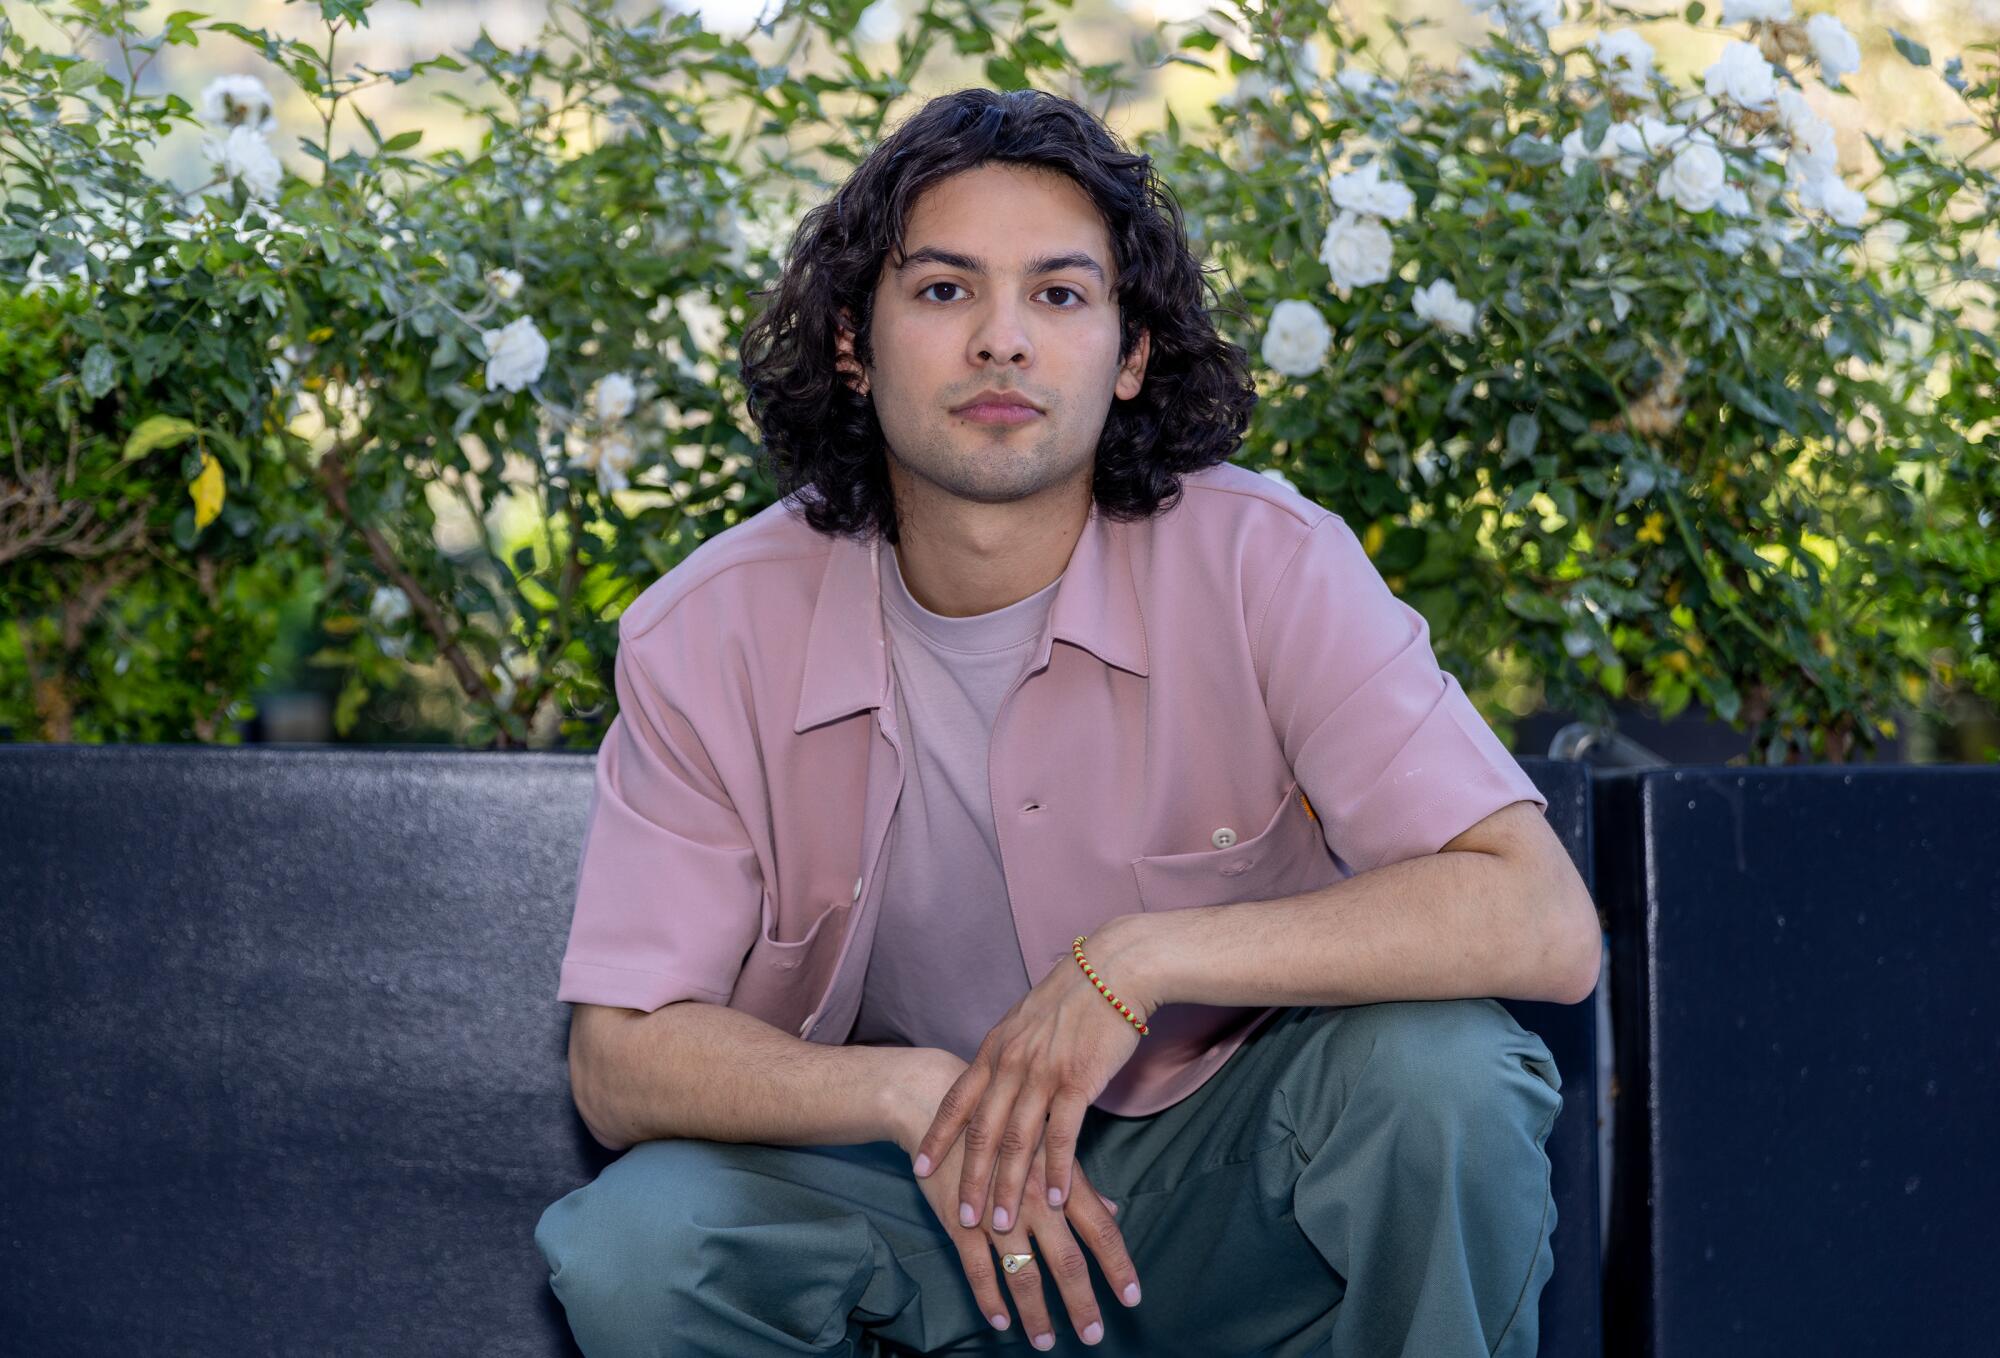 Xolo Maridueña poses in front of a rose bush. He's wearing a red button-up shirt and jeans.